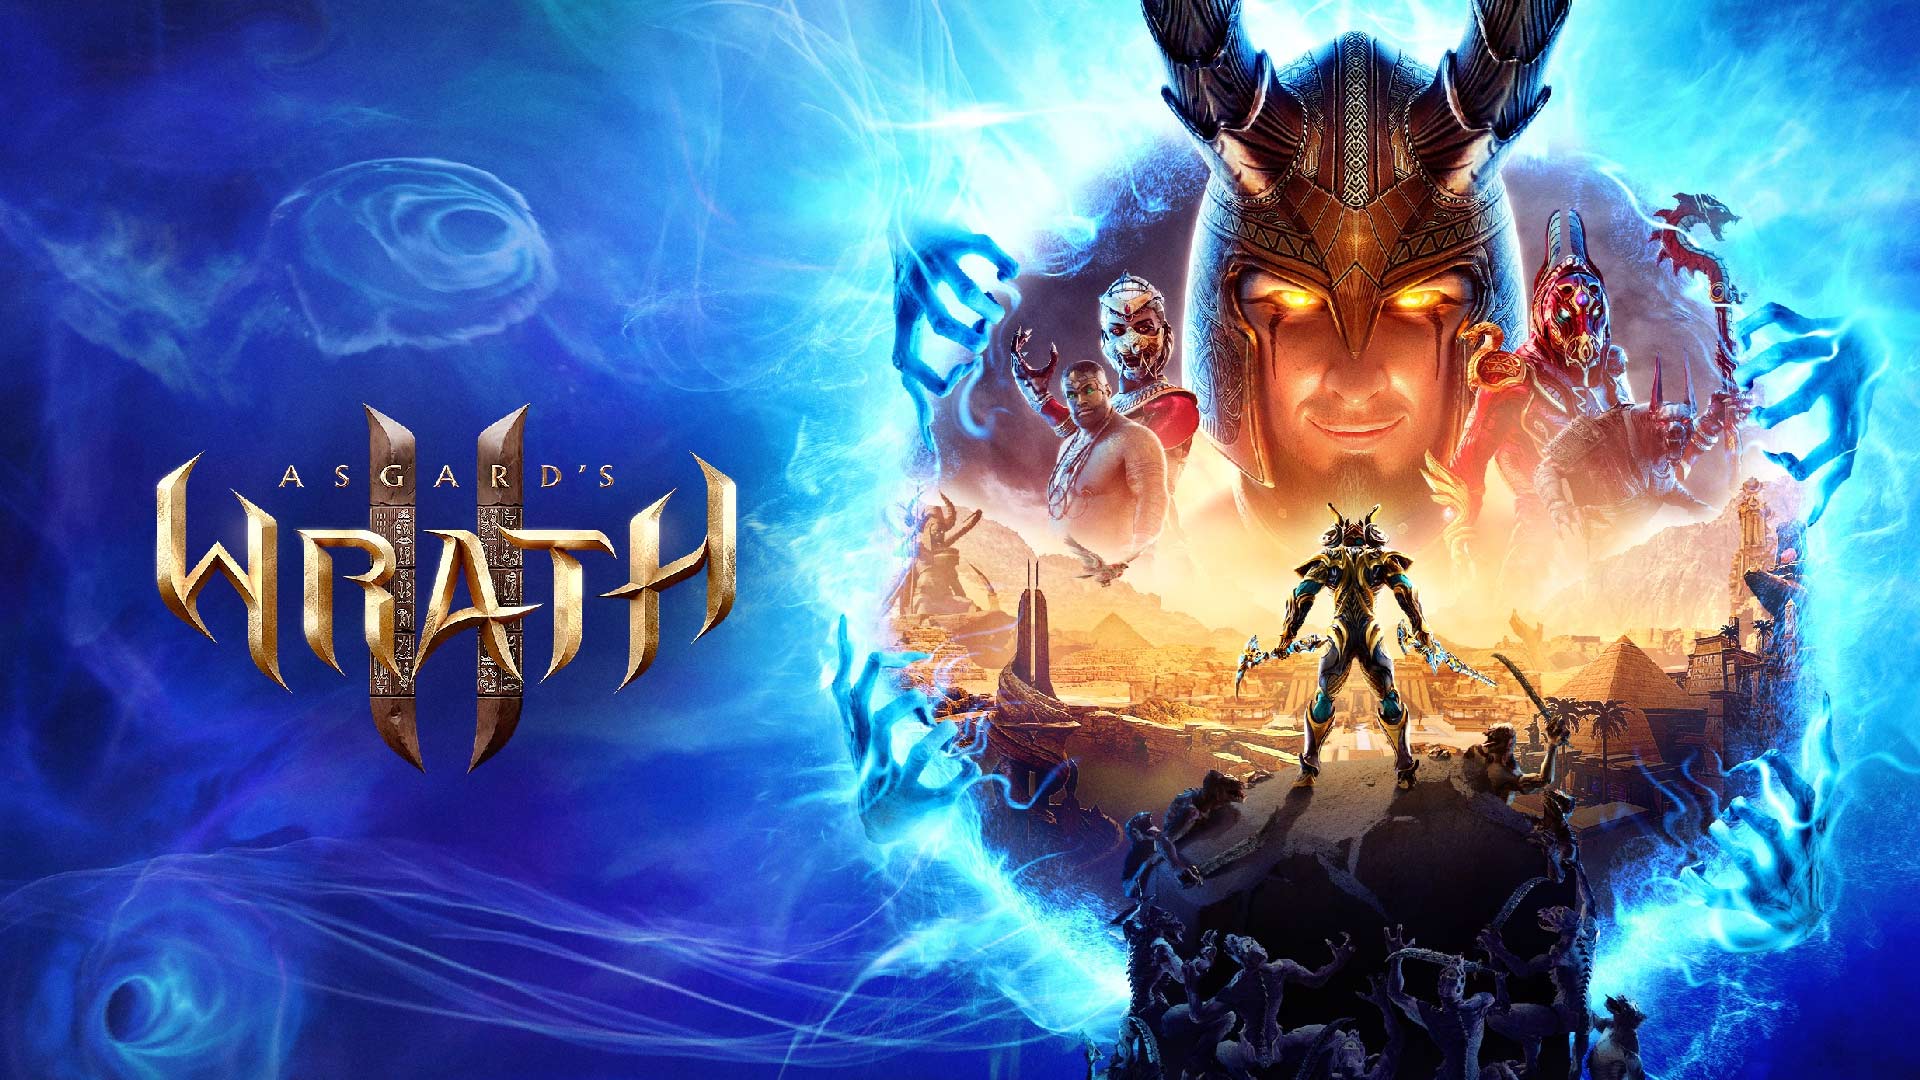 ‘Asgard’s Wrath 2’ Hands-on: The Next Benchmark for Quest Games